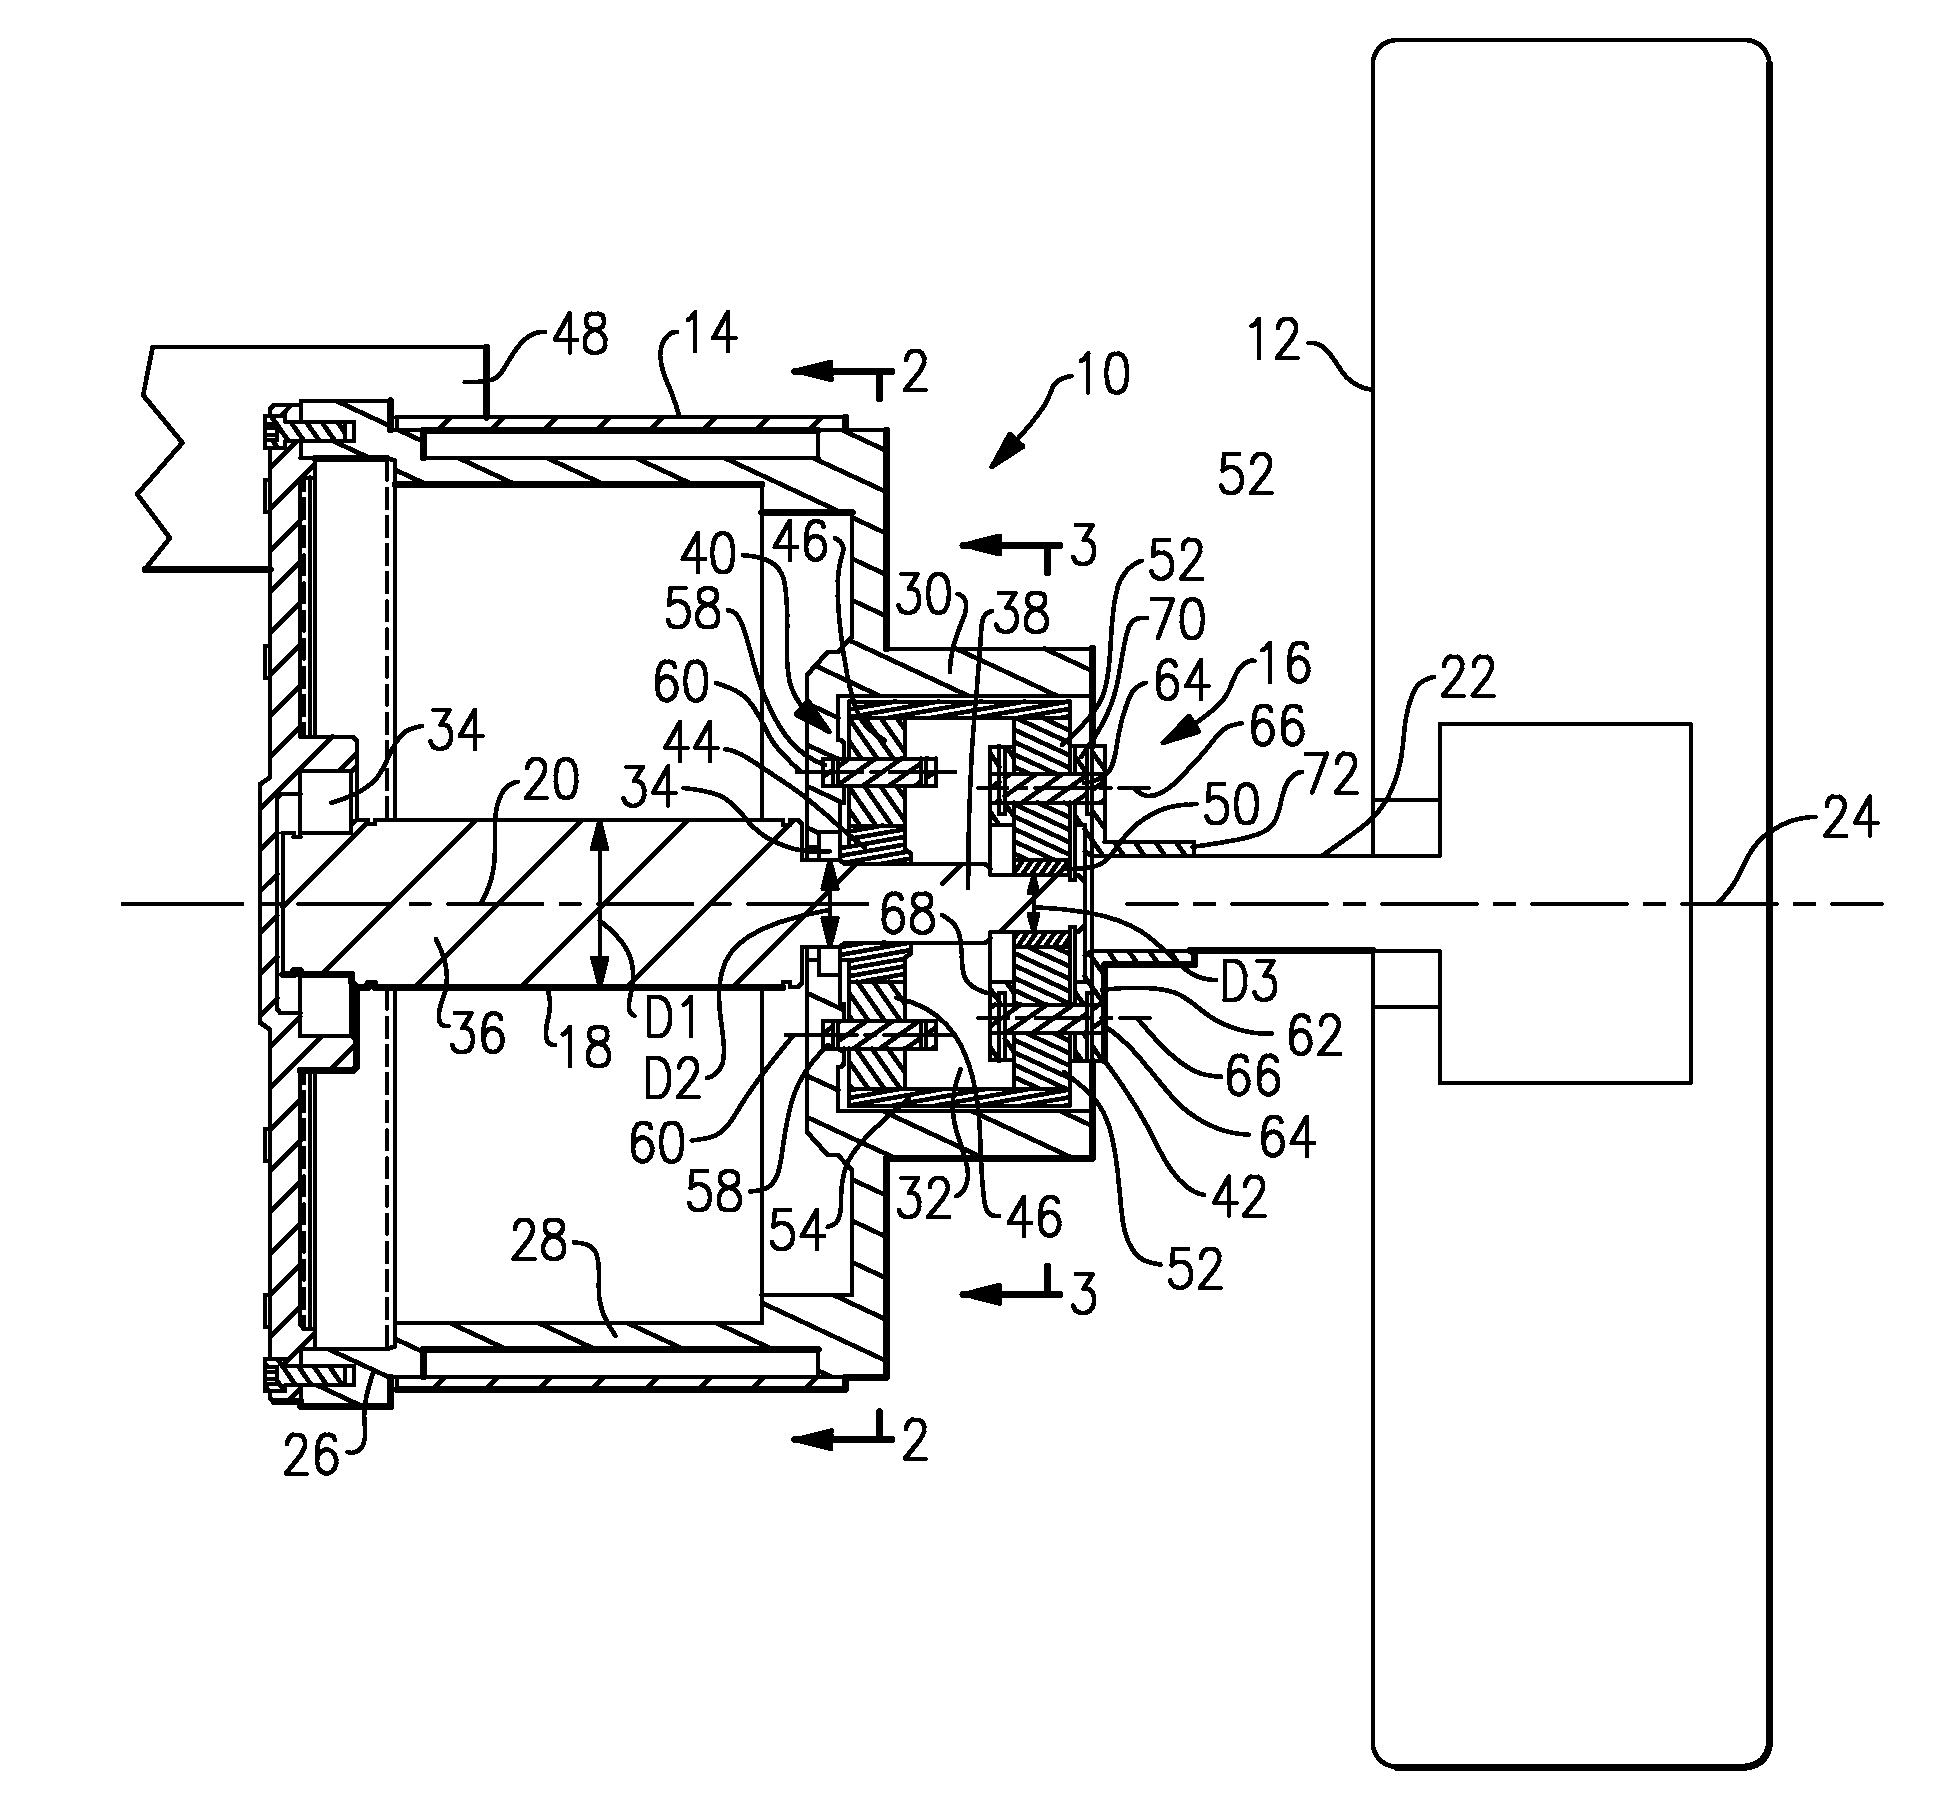 Electric powertrain system with planetary drive